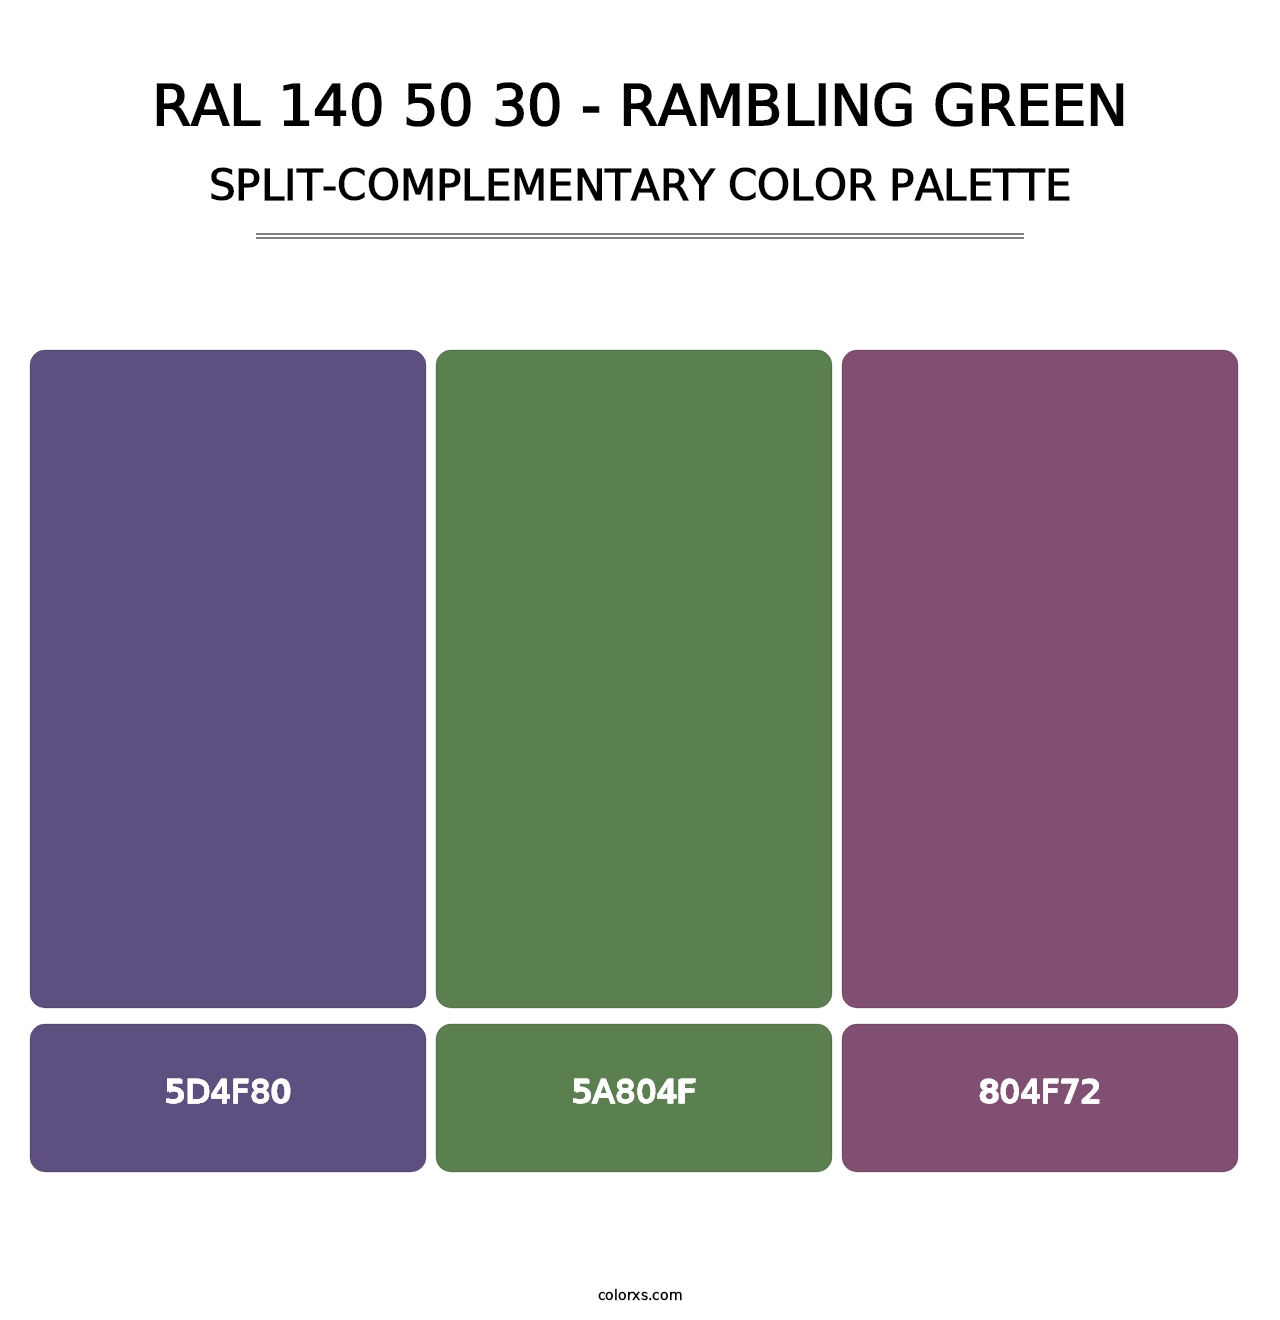 RAL 140 50 30 - Rambling Green - Split-Complementary Color Palette